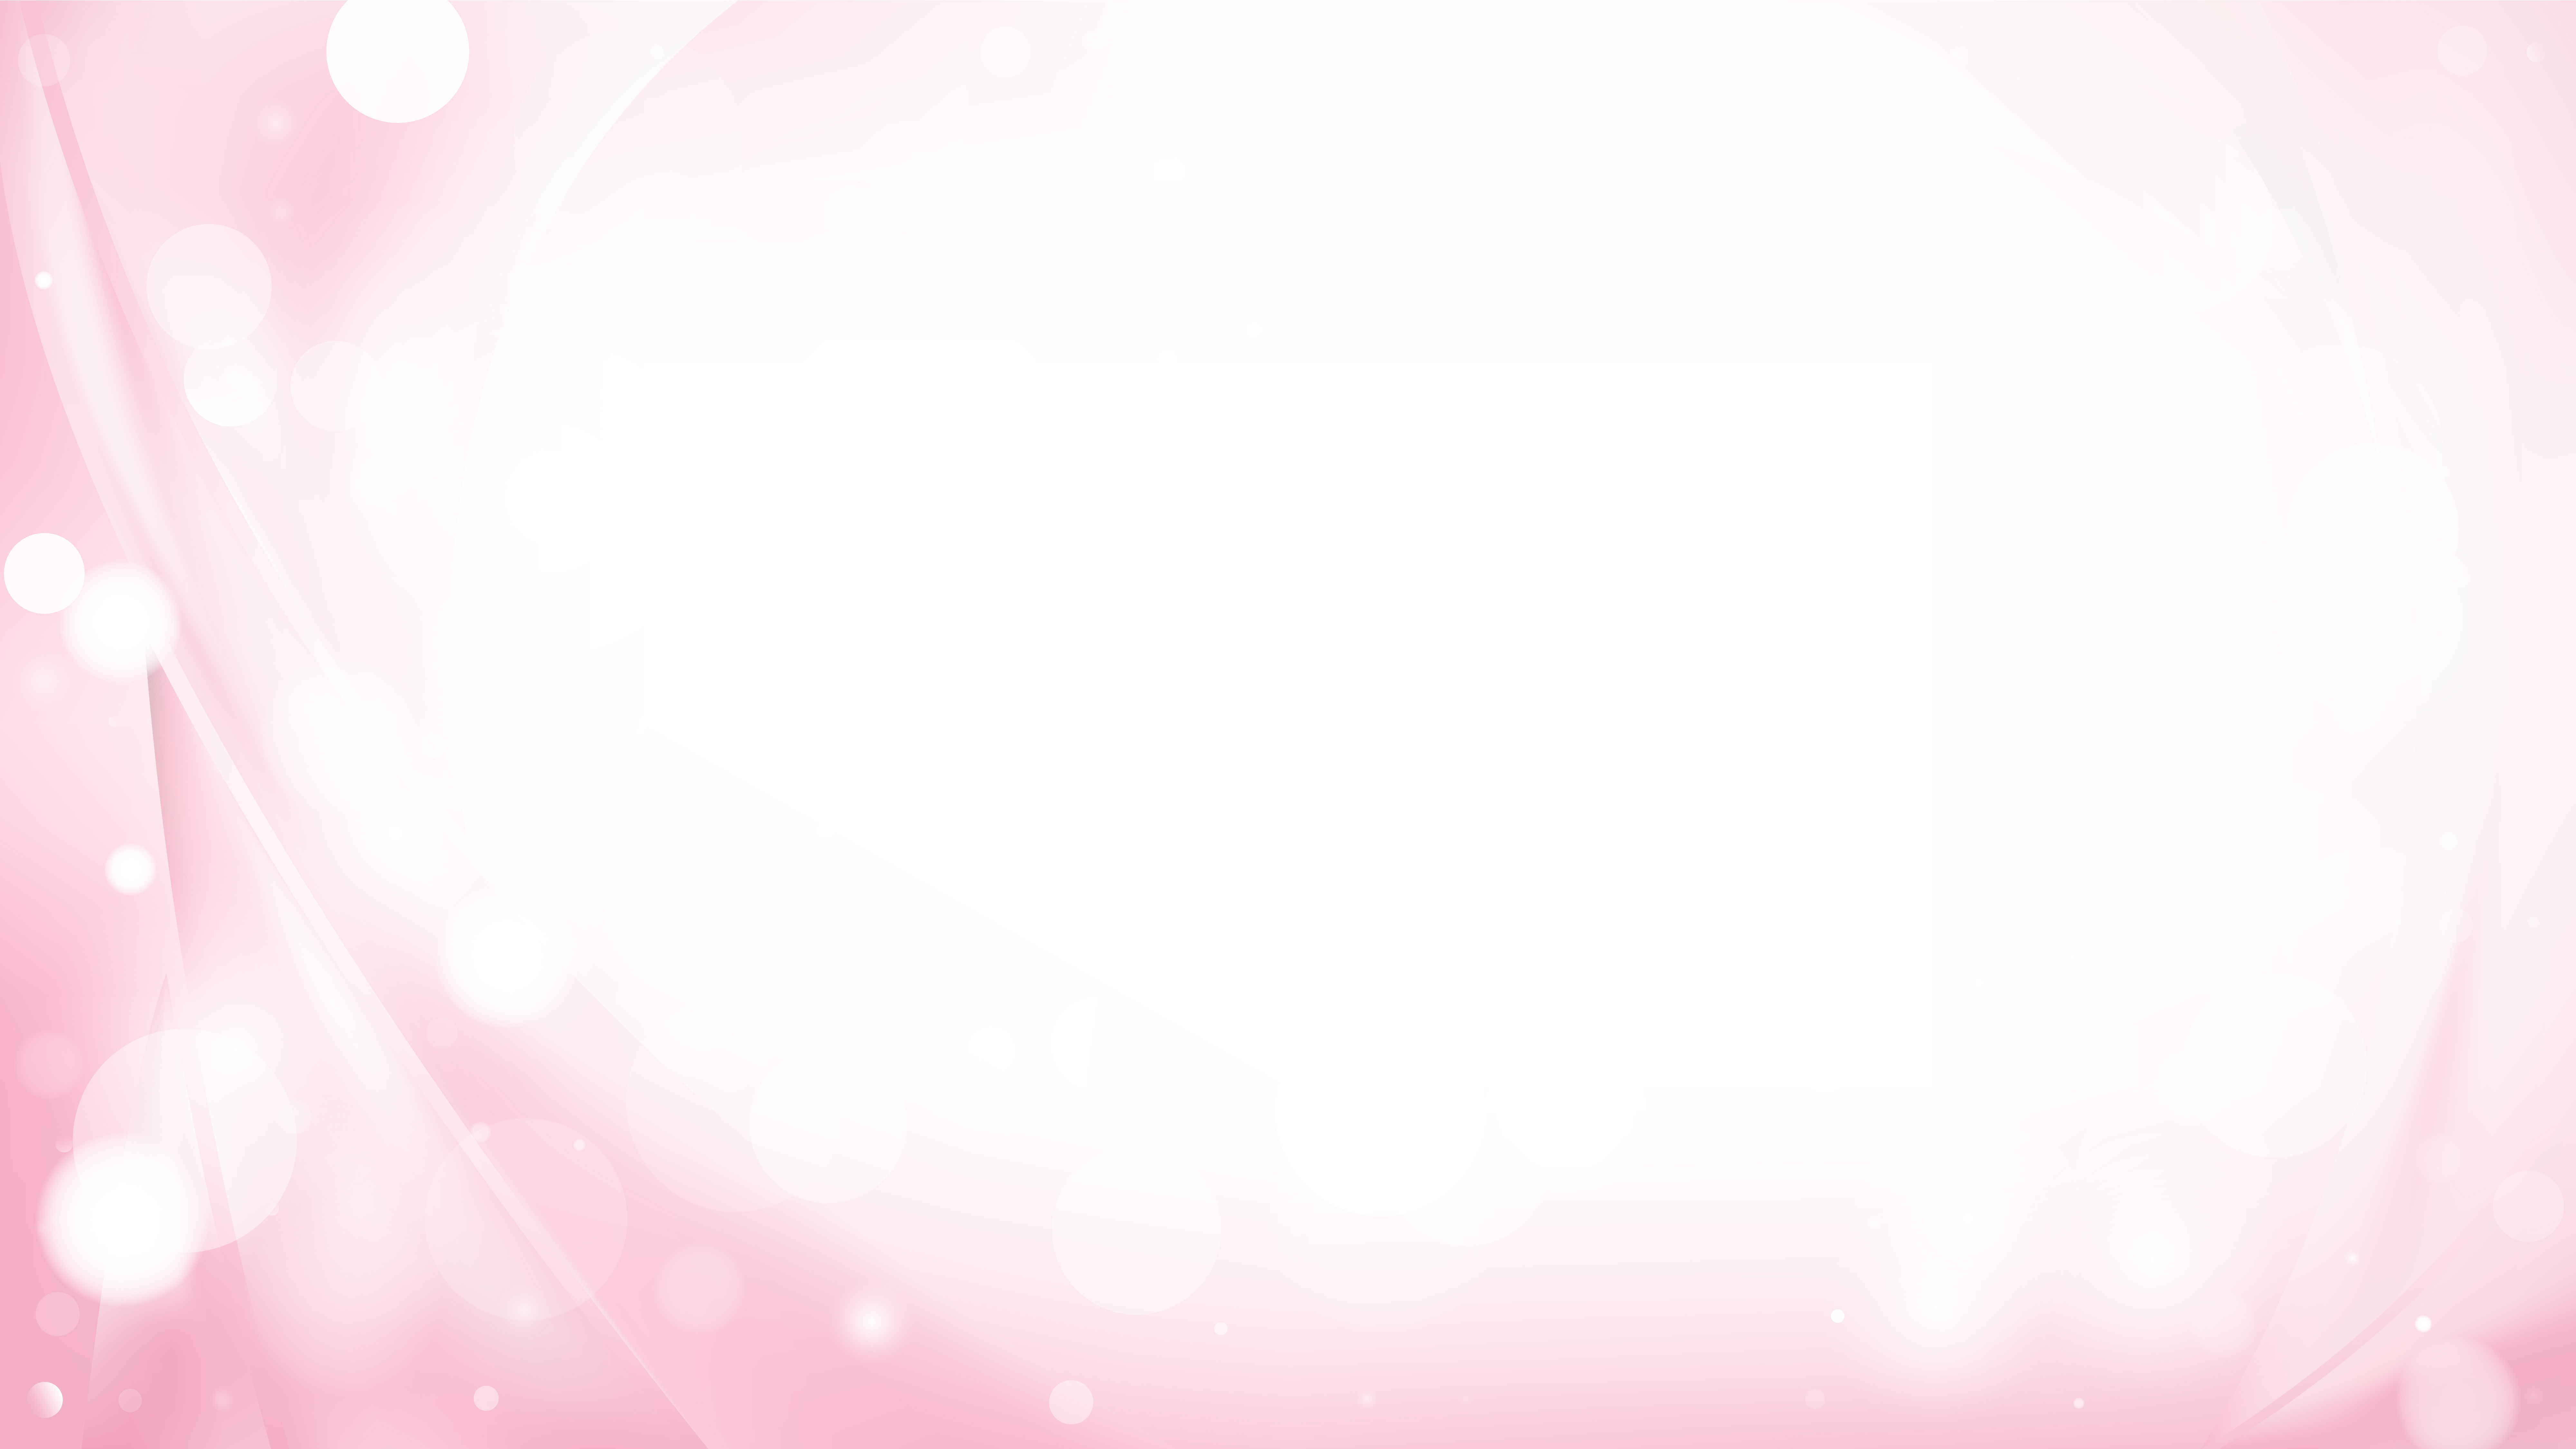 Free Abstract Pink and White Background Vector